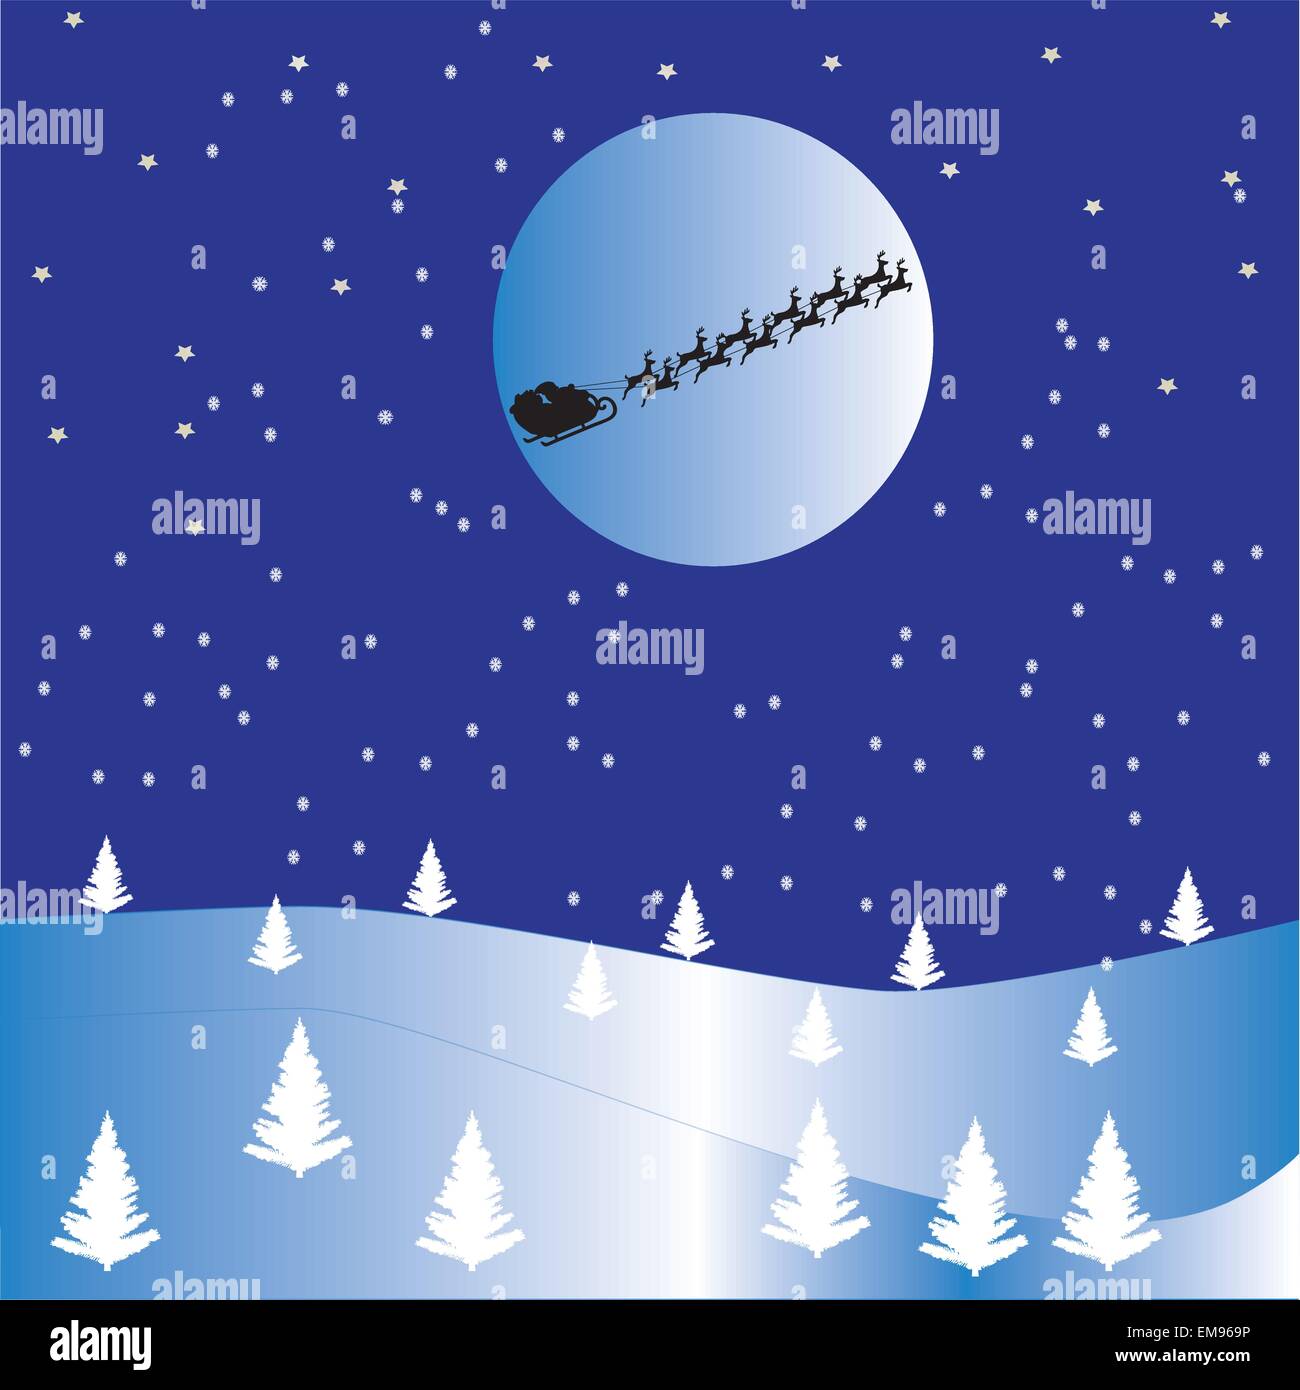 A vector illustration of a Snowy Christmas Scene with stars, snow falling, christmas trees and Santas sleigh flying in front of the moon Stock Vector